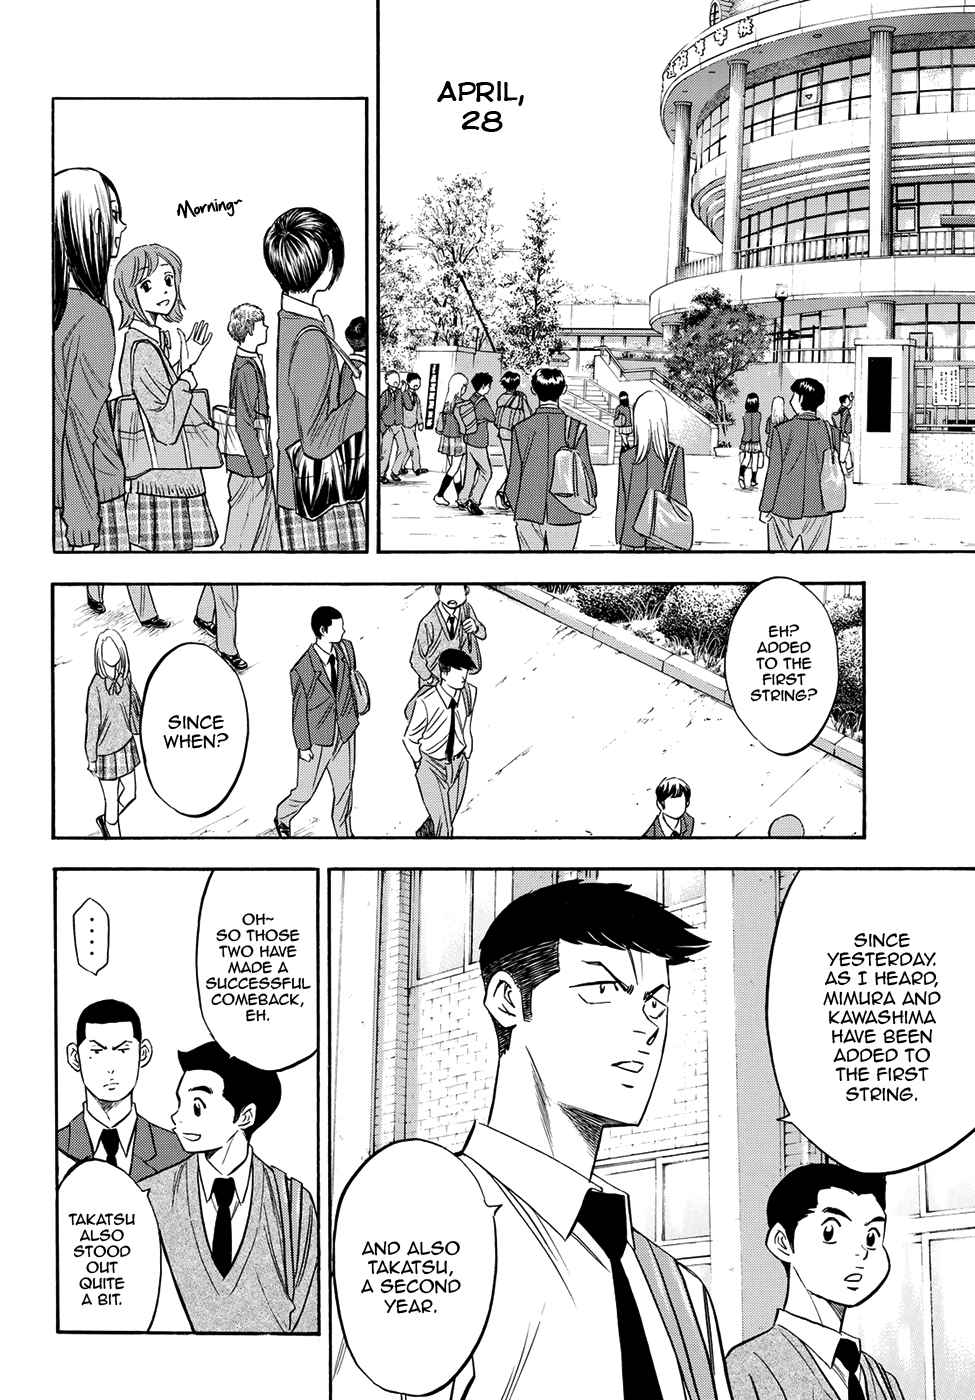 Diamond no Ace Act II Vol. 7 Ch. 59 There's No Time